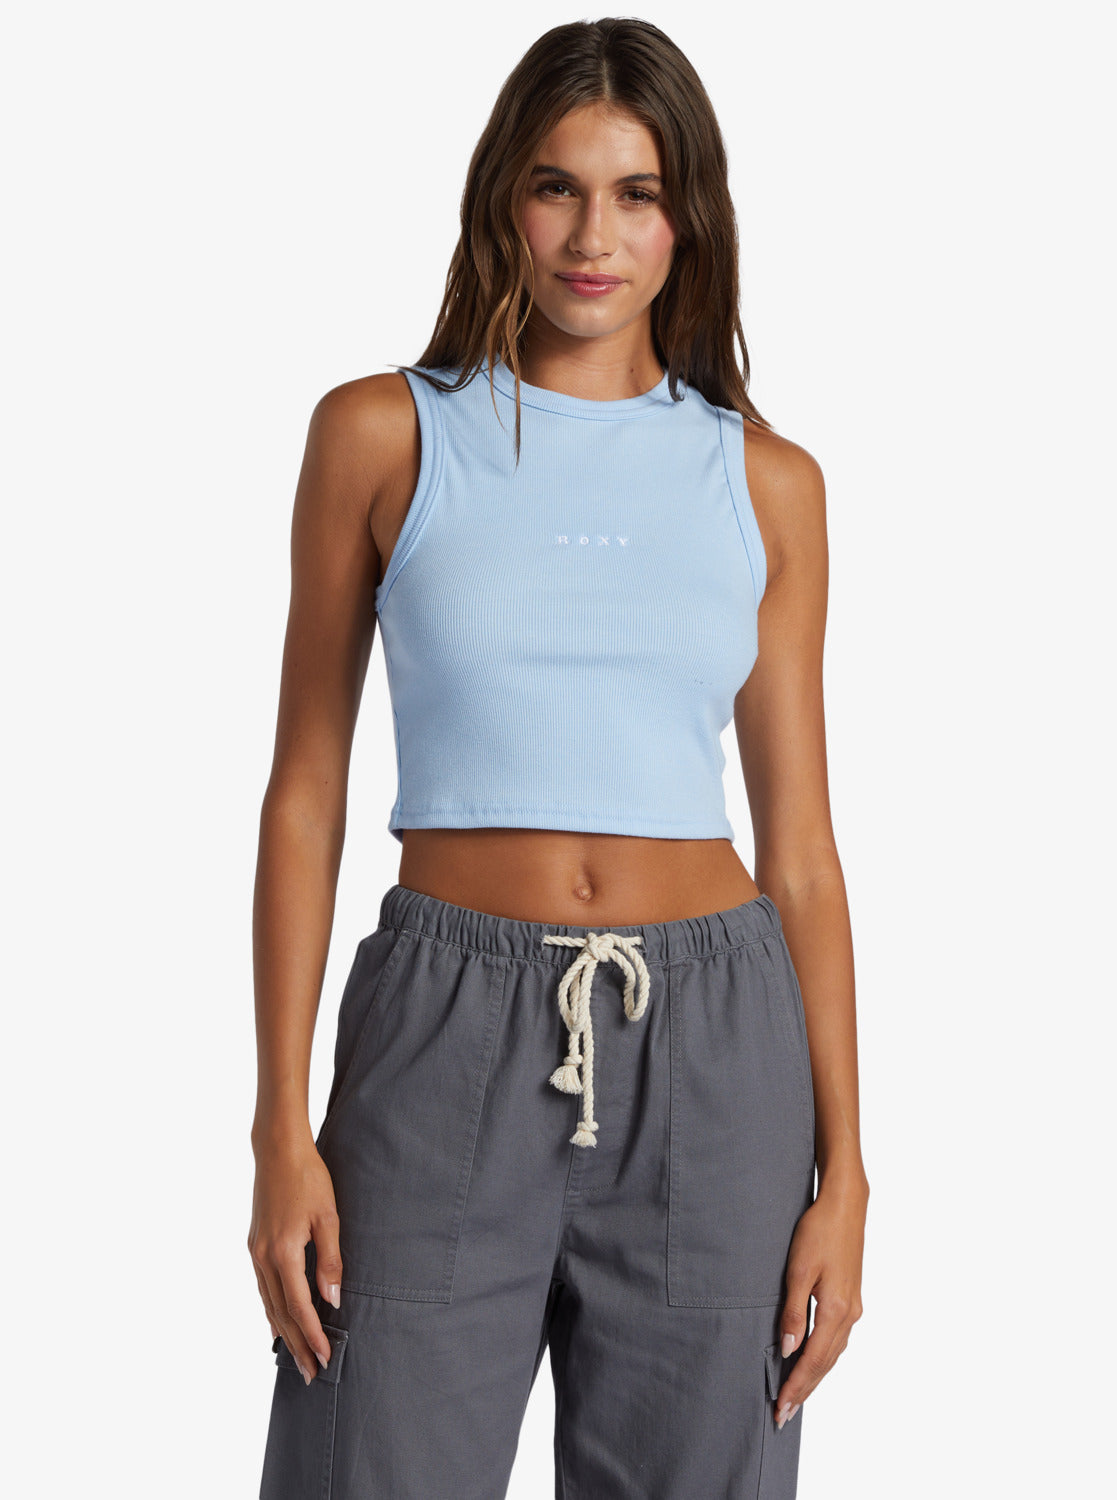 Roxify Fitted Ribbed Tank - Bel Air Blue